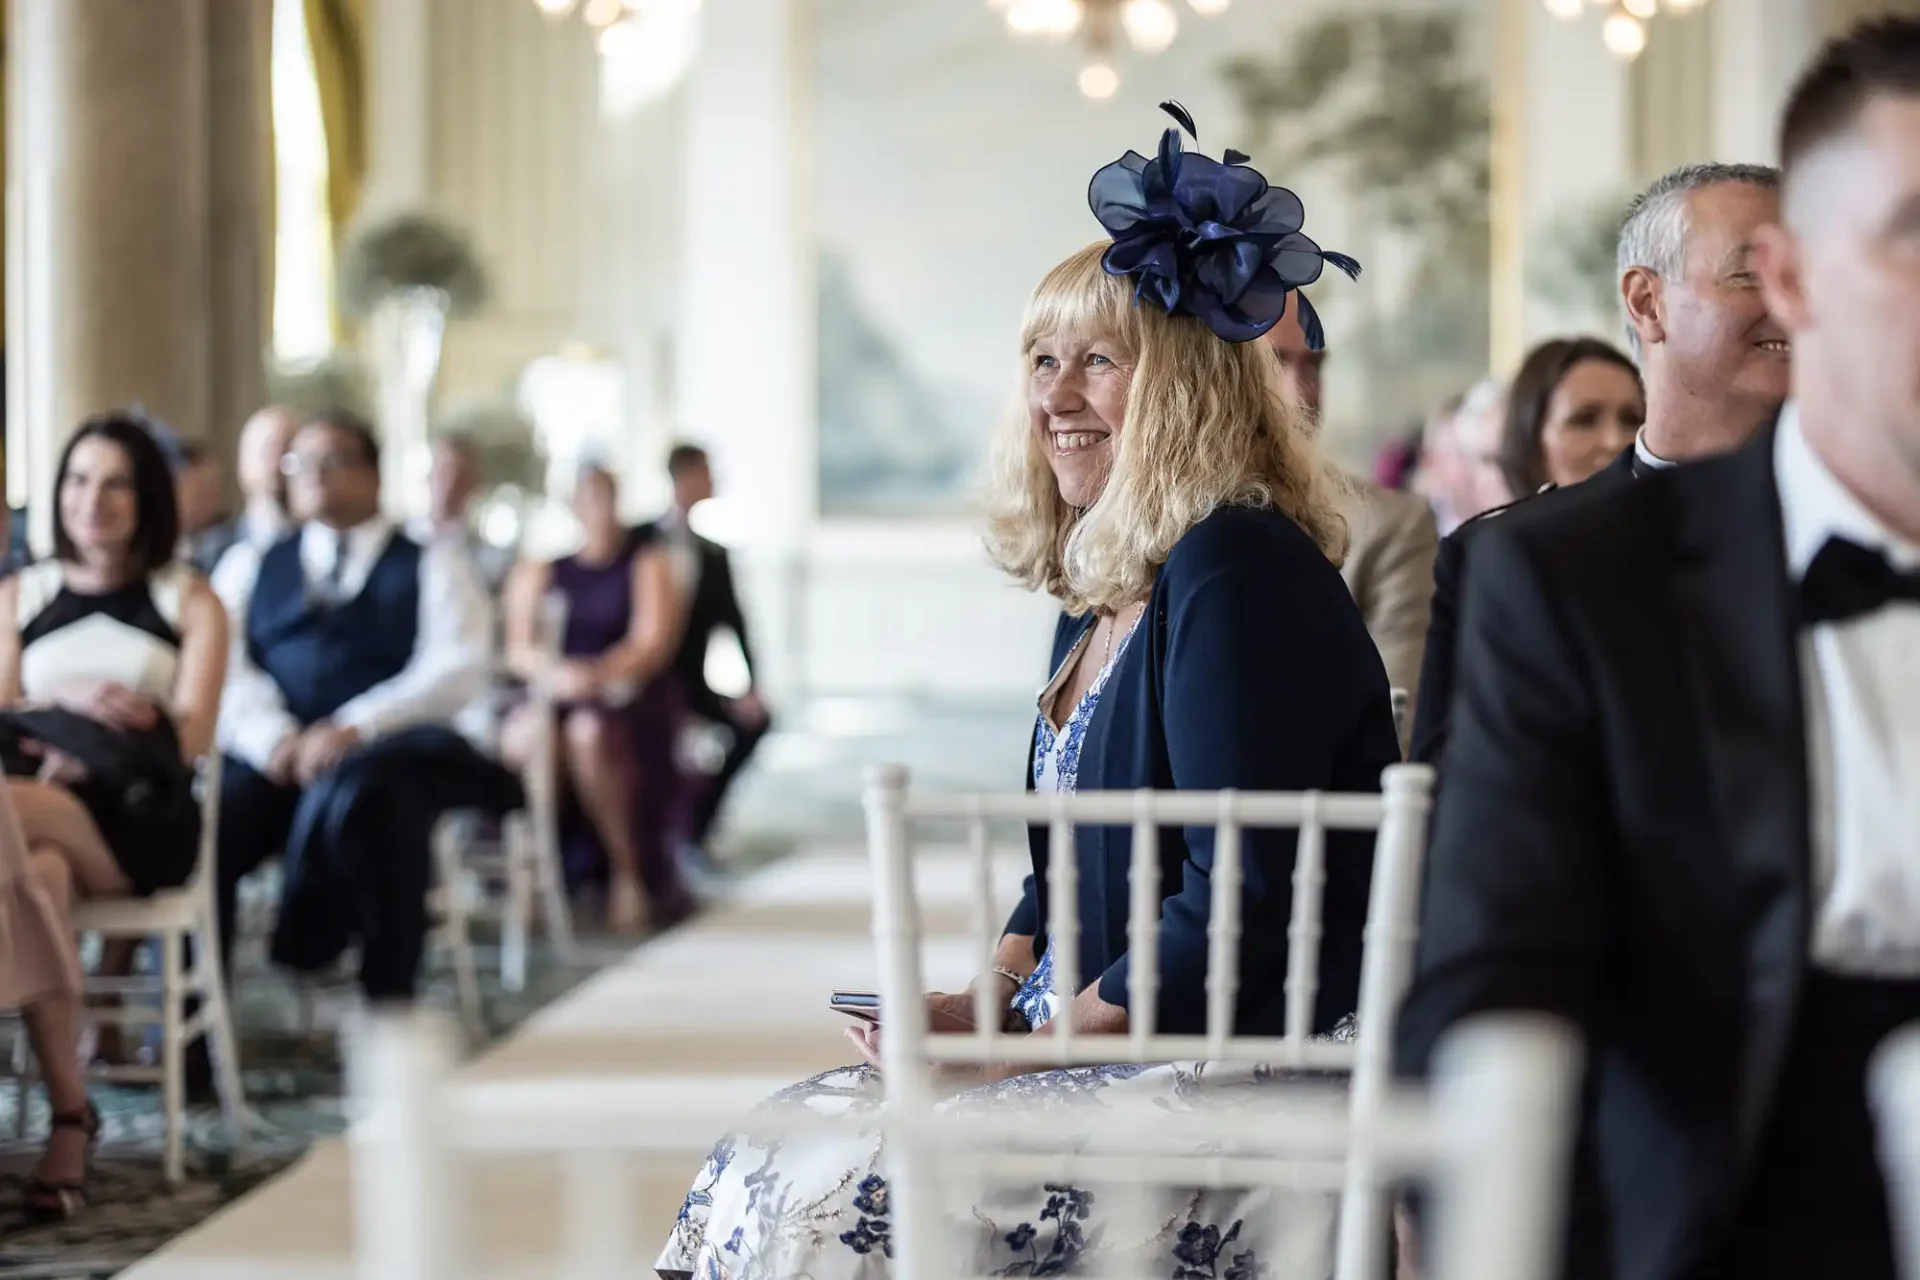 Woman in a blue hat and dress smiles while seated at an elegant wedding ceremony in a lavishly decorated room.